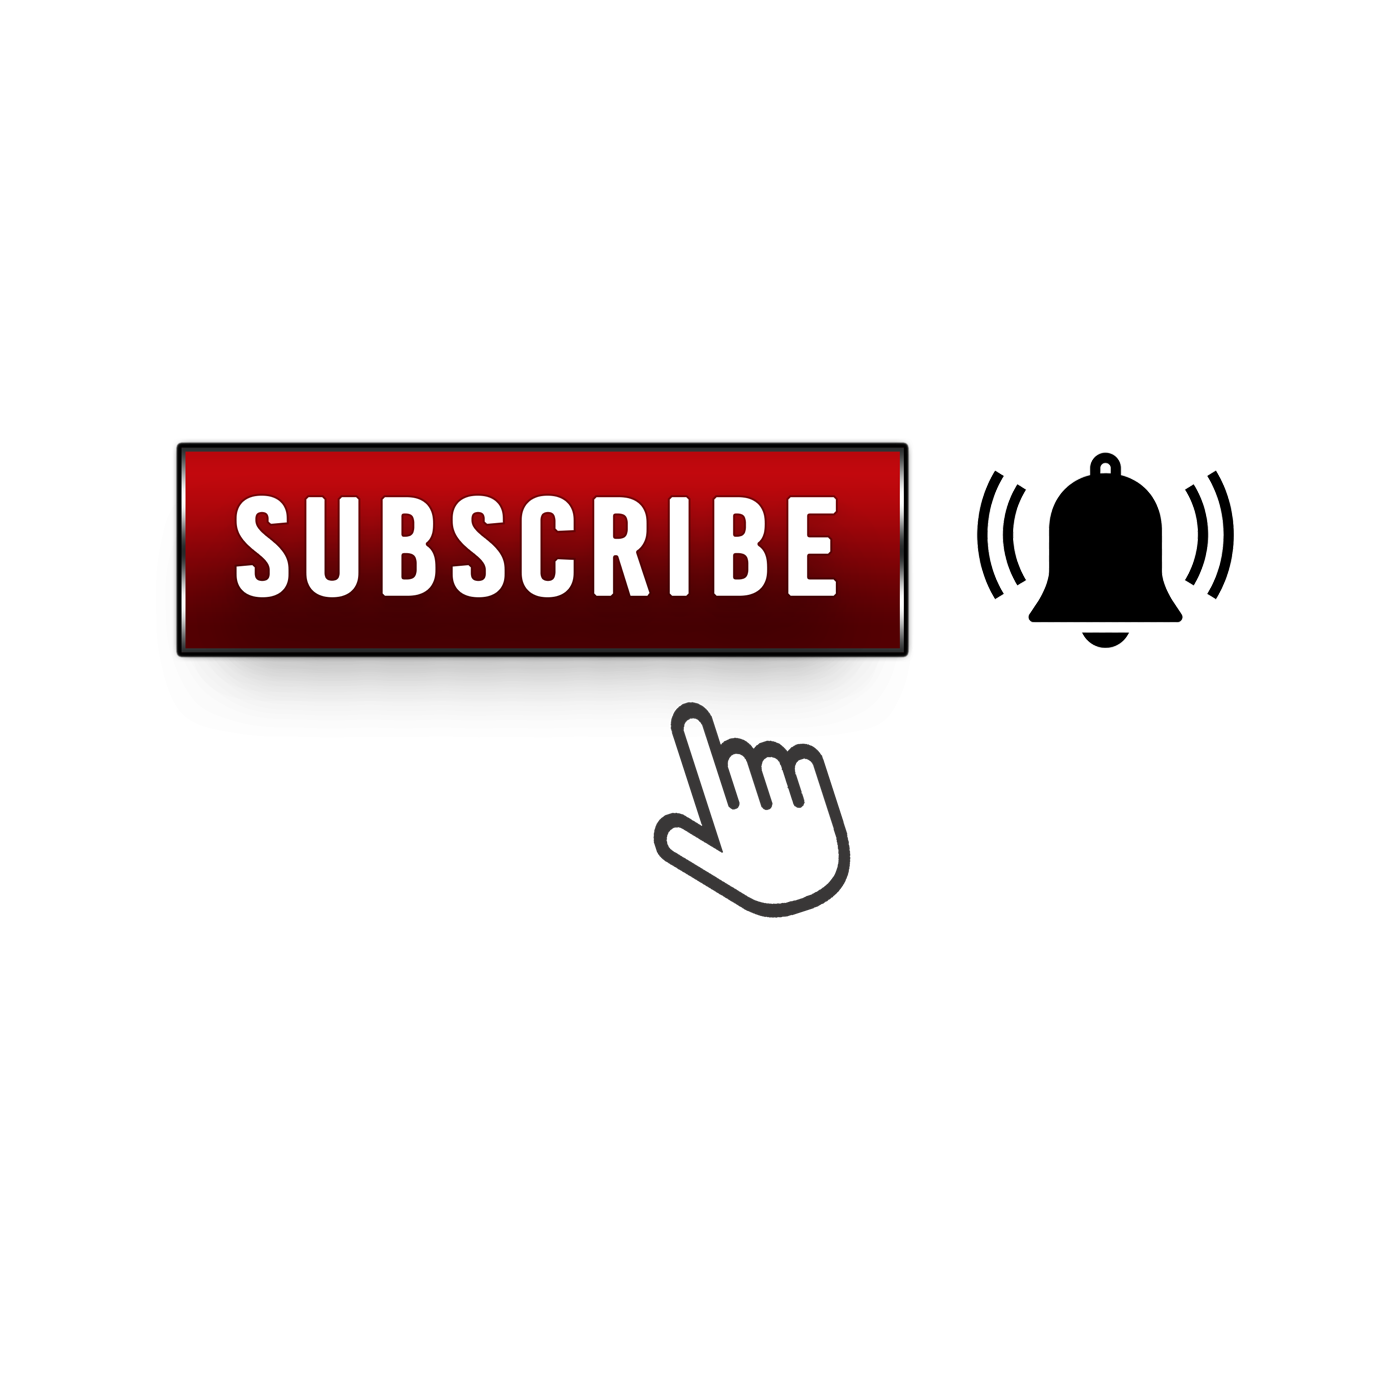 Subscribe Images, HD Pictures For Free Vectors Download - Lovepik.com